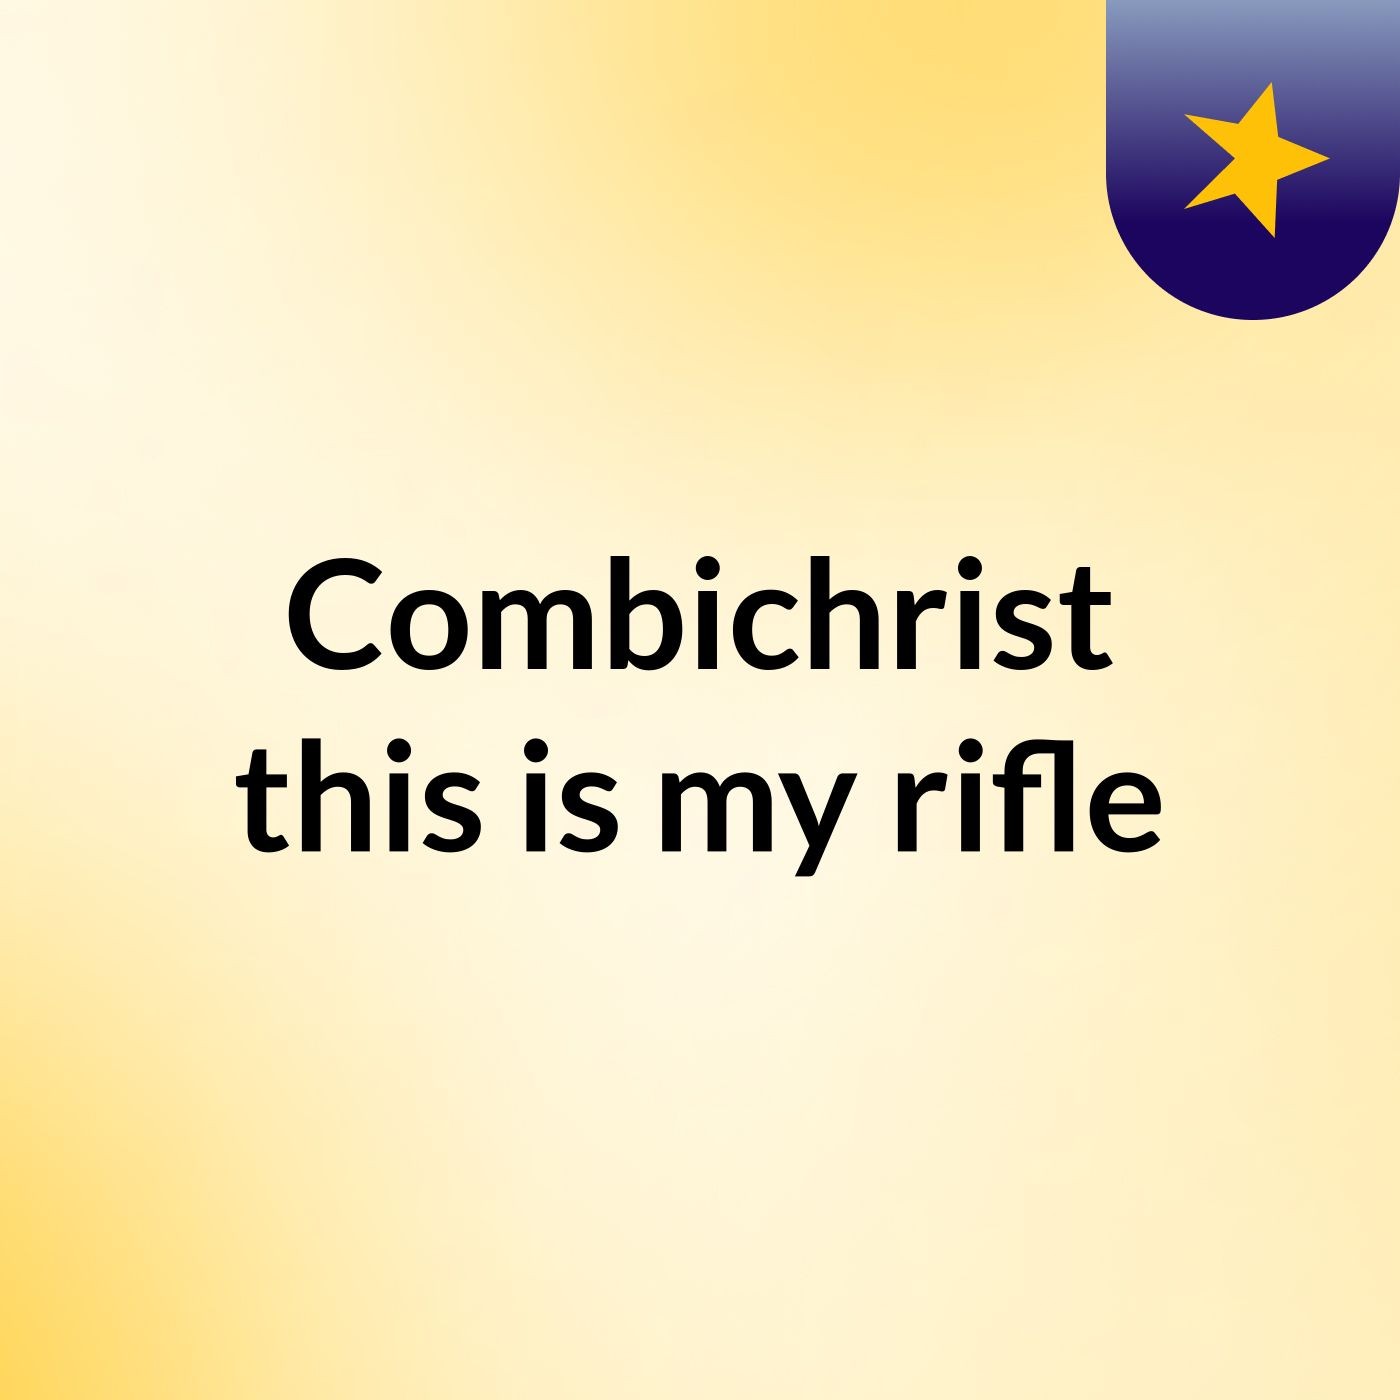 Combichrist this is my rifle